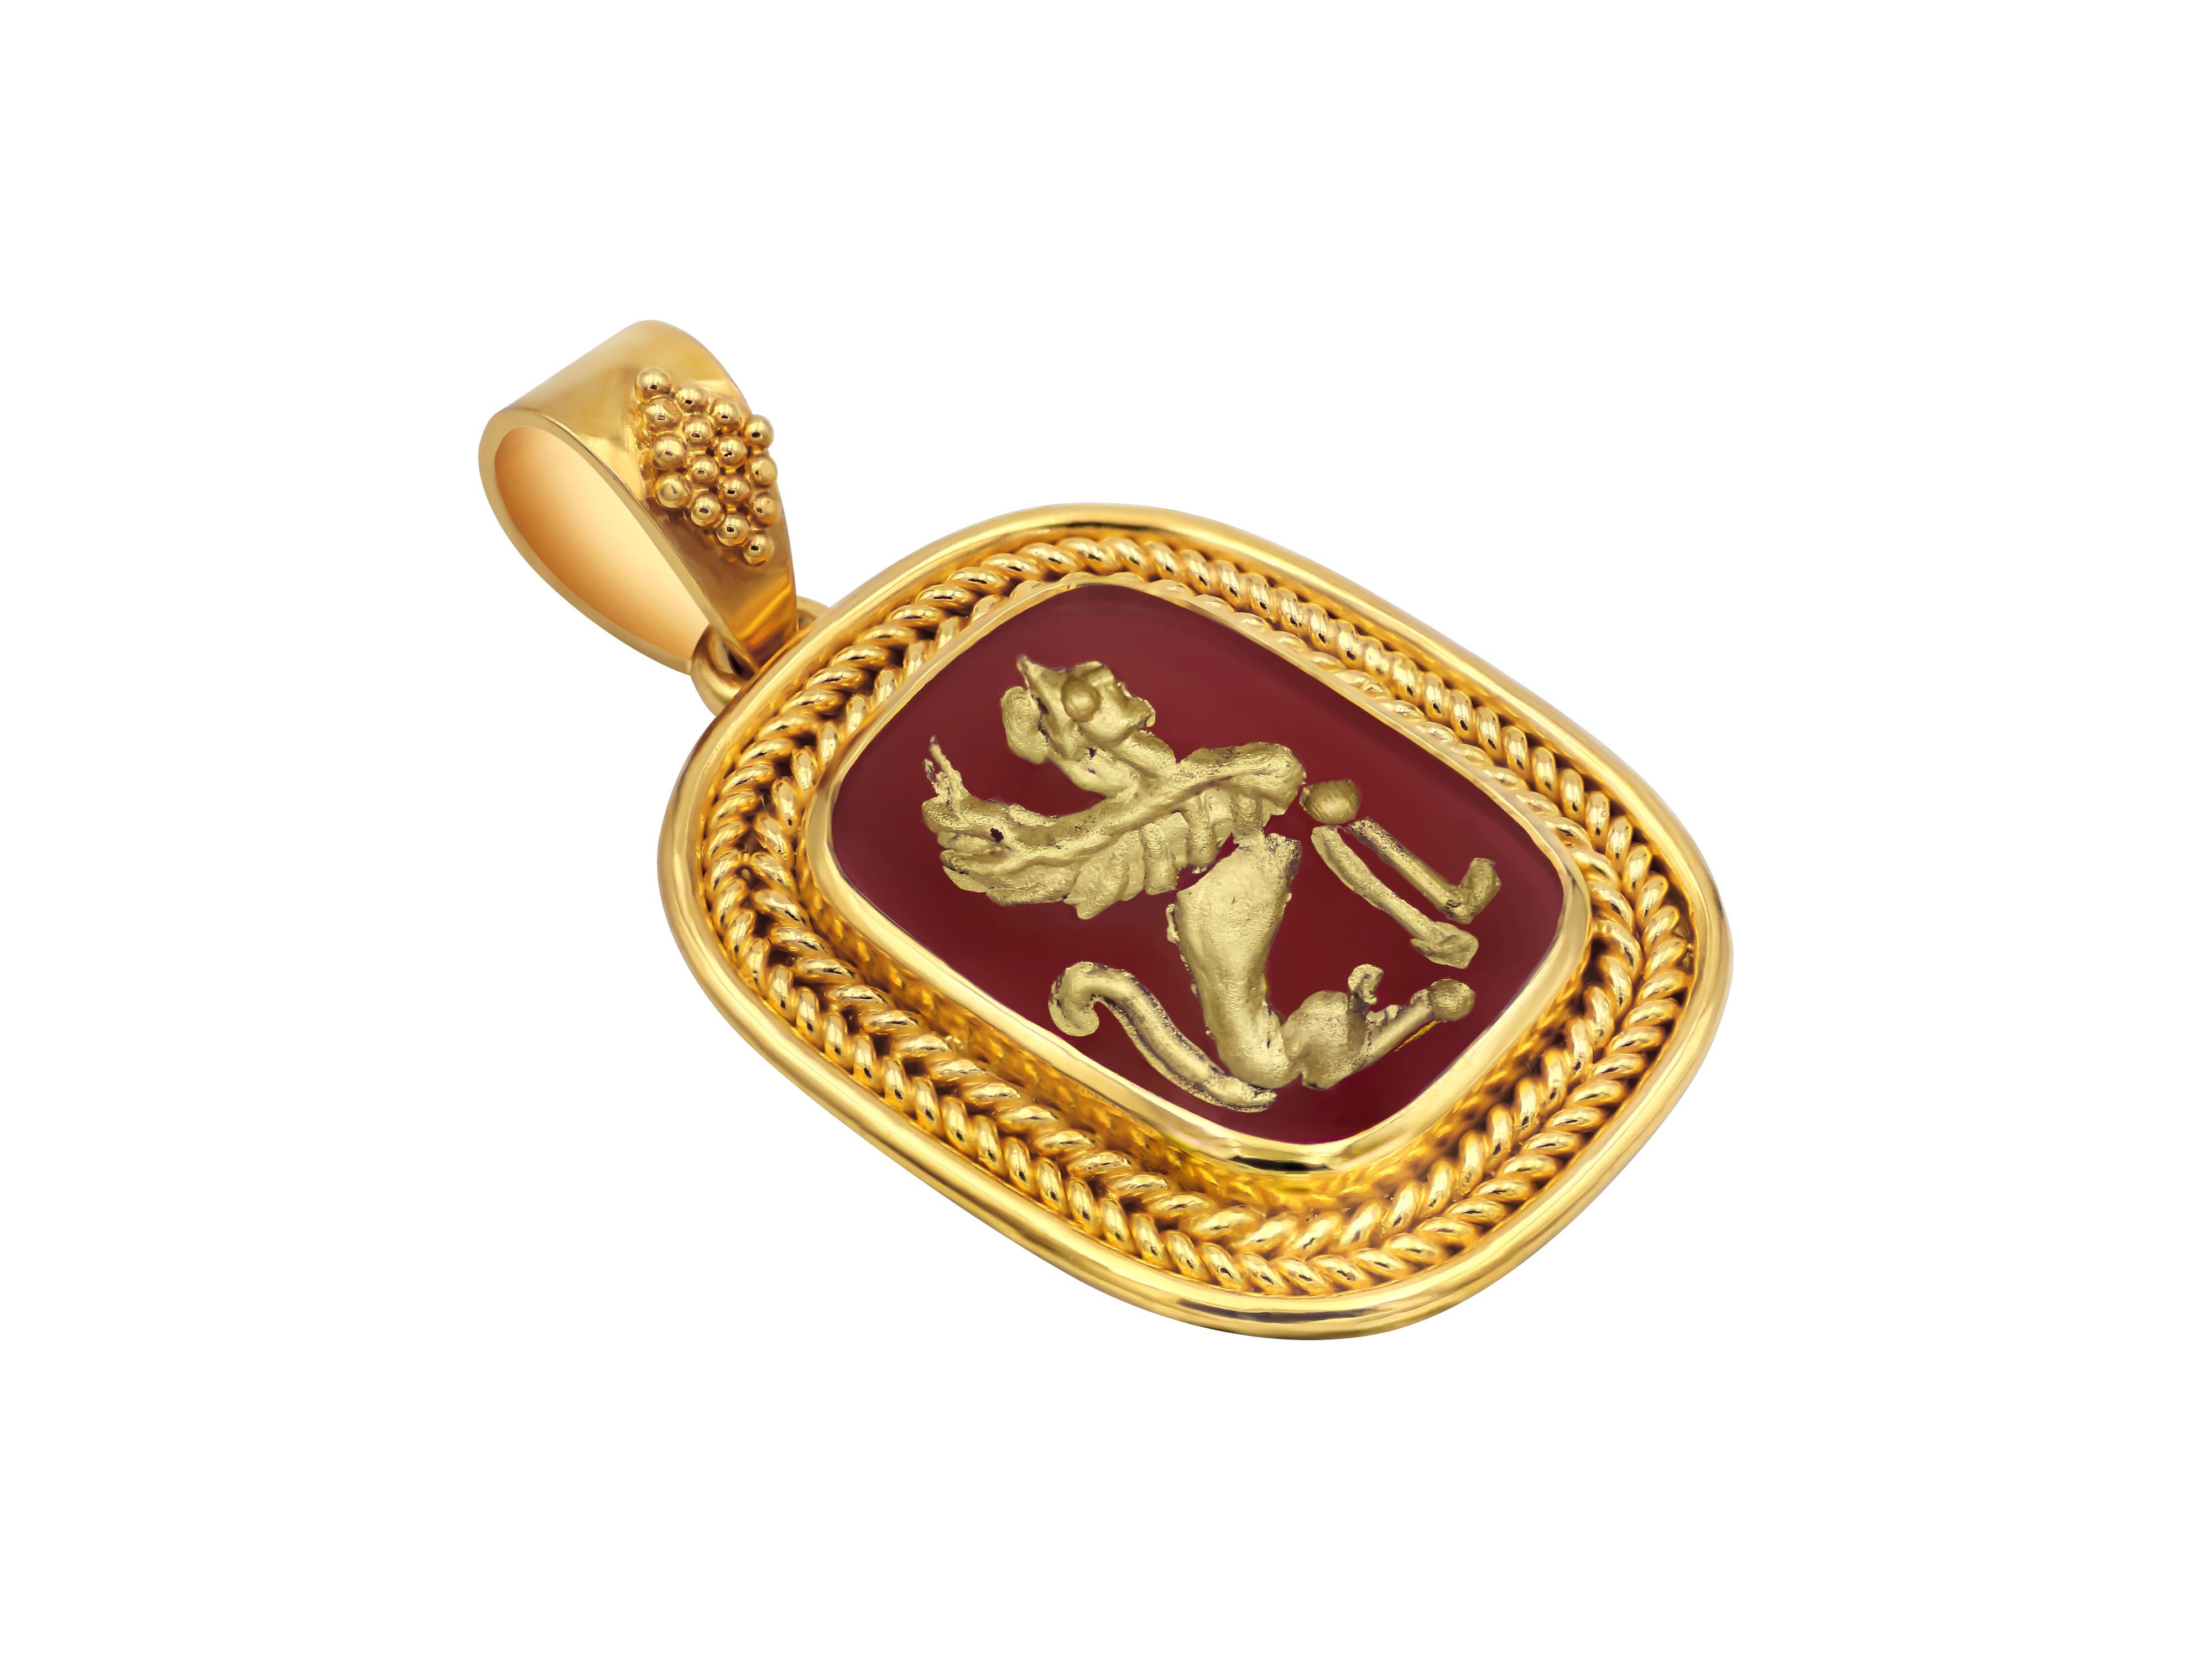 18k yellow gold pendant that follows precisely the museum guidelines with a fish bone wiring. The bezel is decorated with granulation and the Cornelian is carved showing the Sphinx. We have colored with gold paint the carving so it can really bring